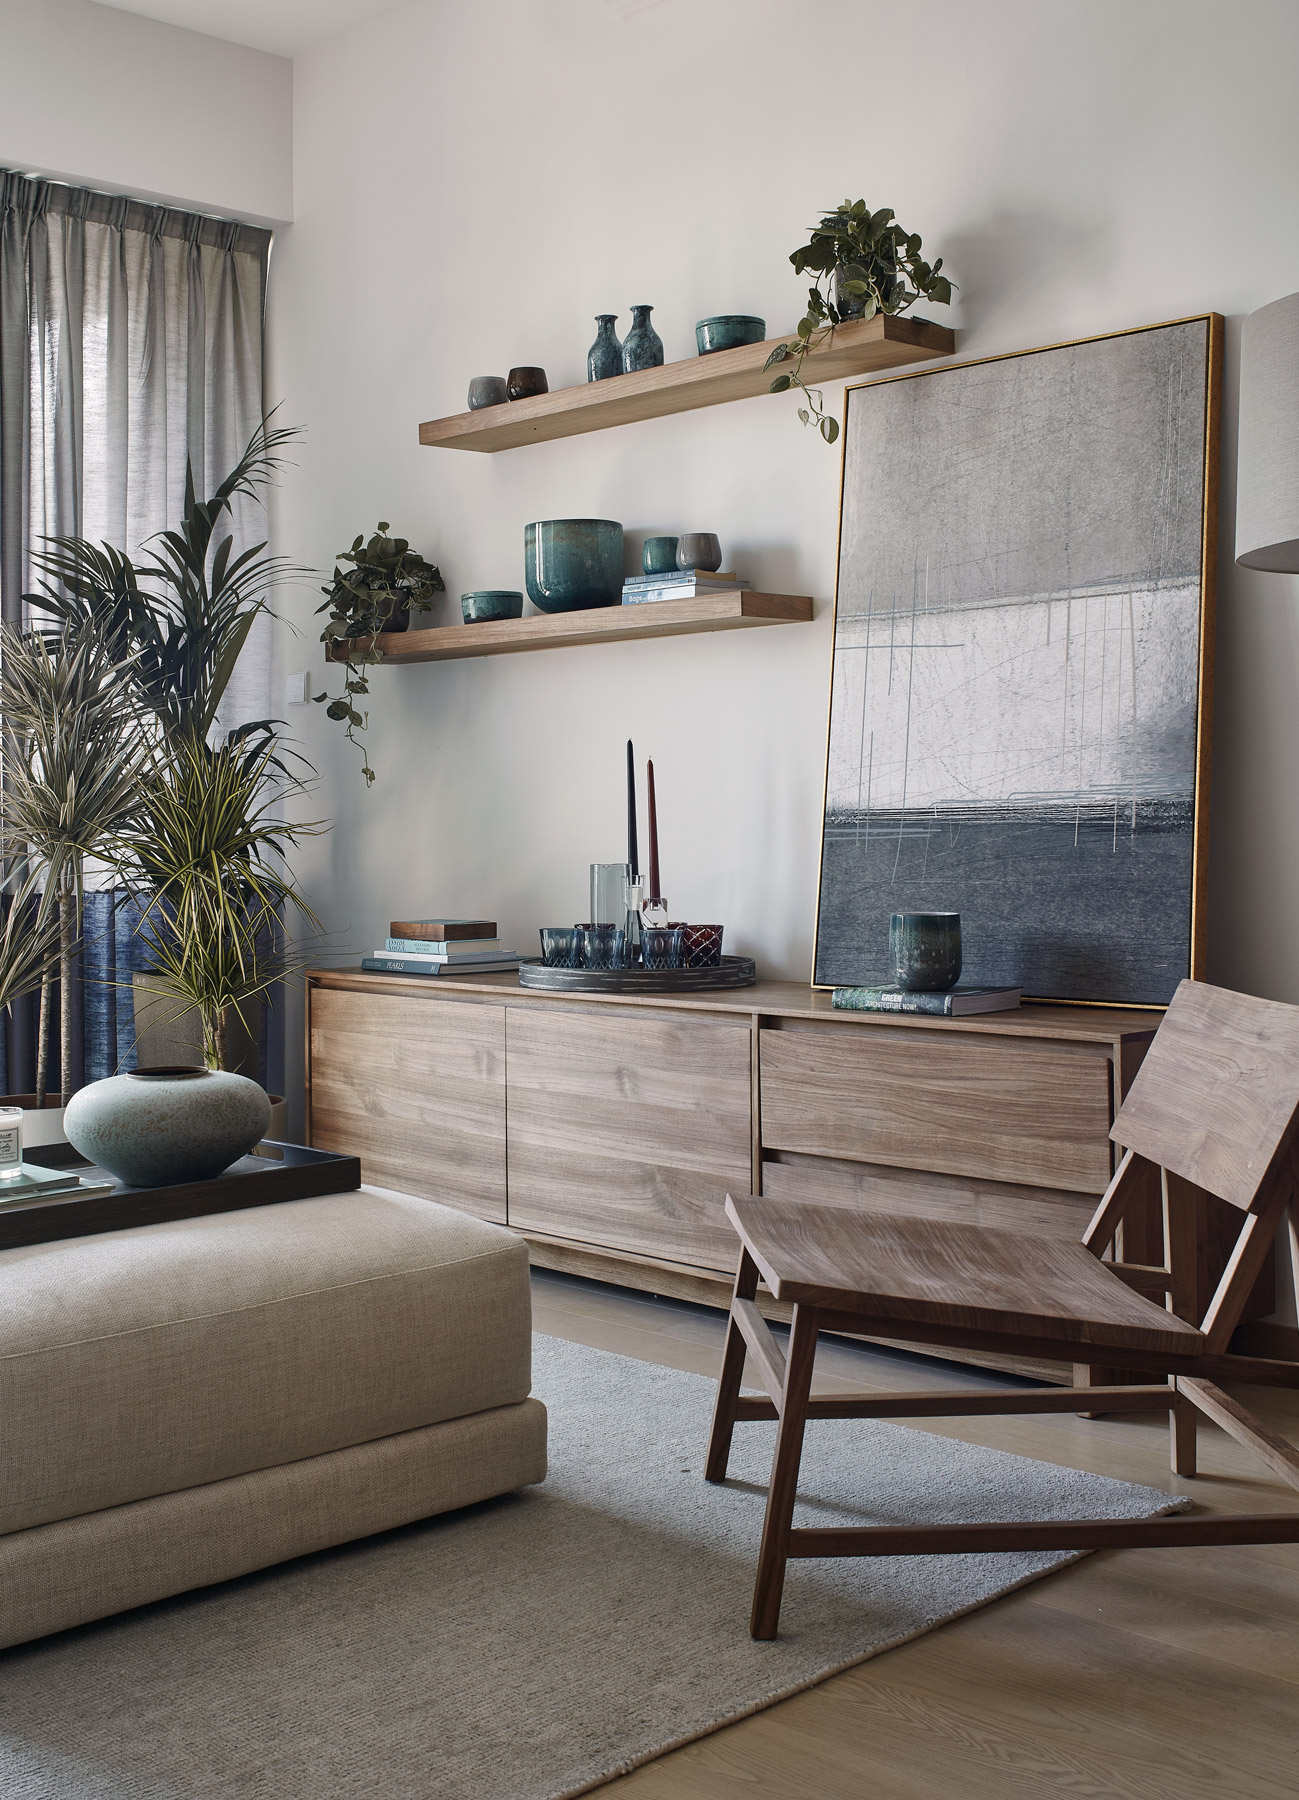 5 ways to turn your home into a wooden oasis from TREE’s show flat at The Bloomsway